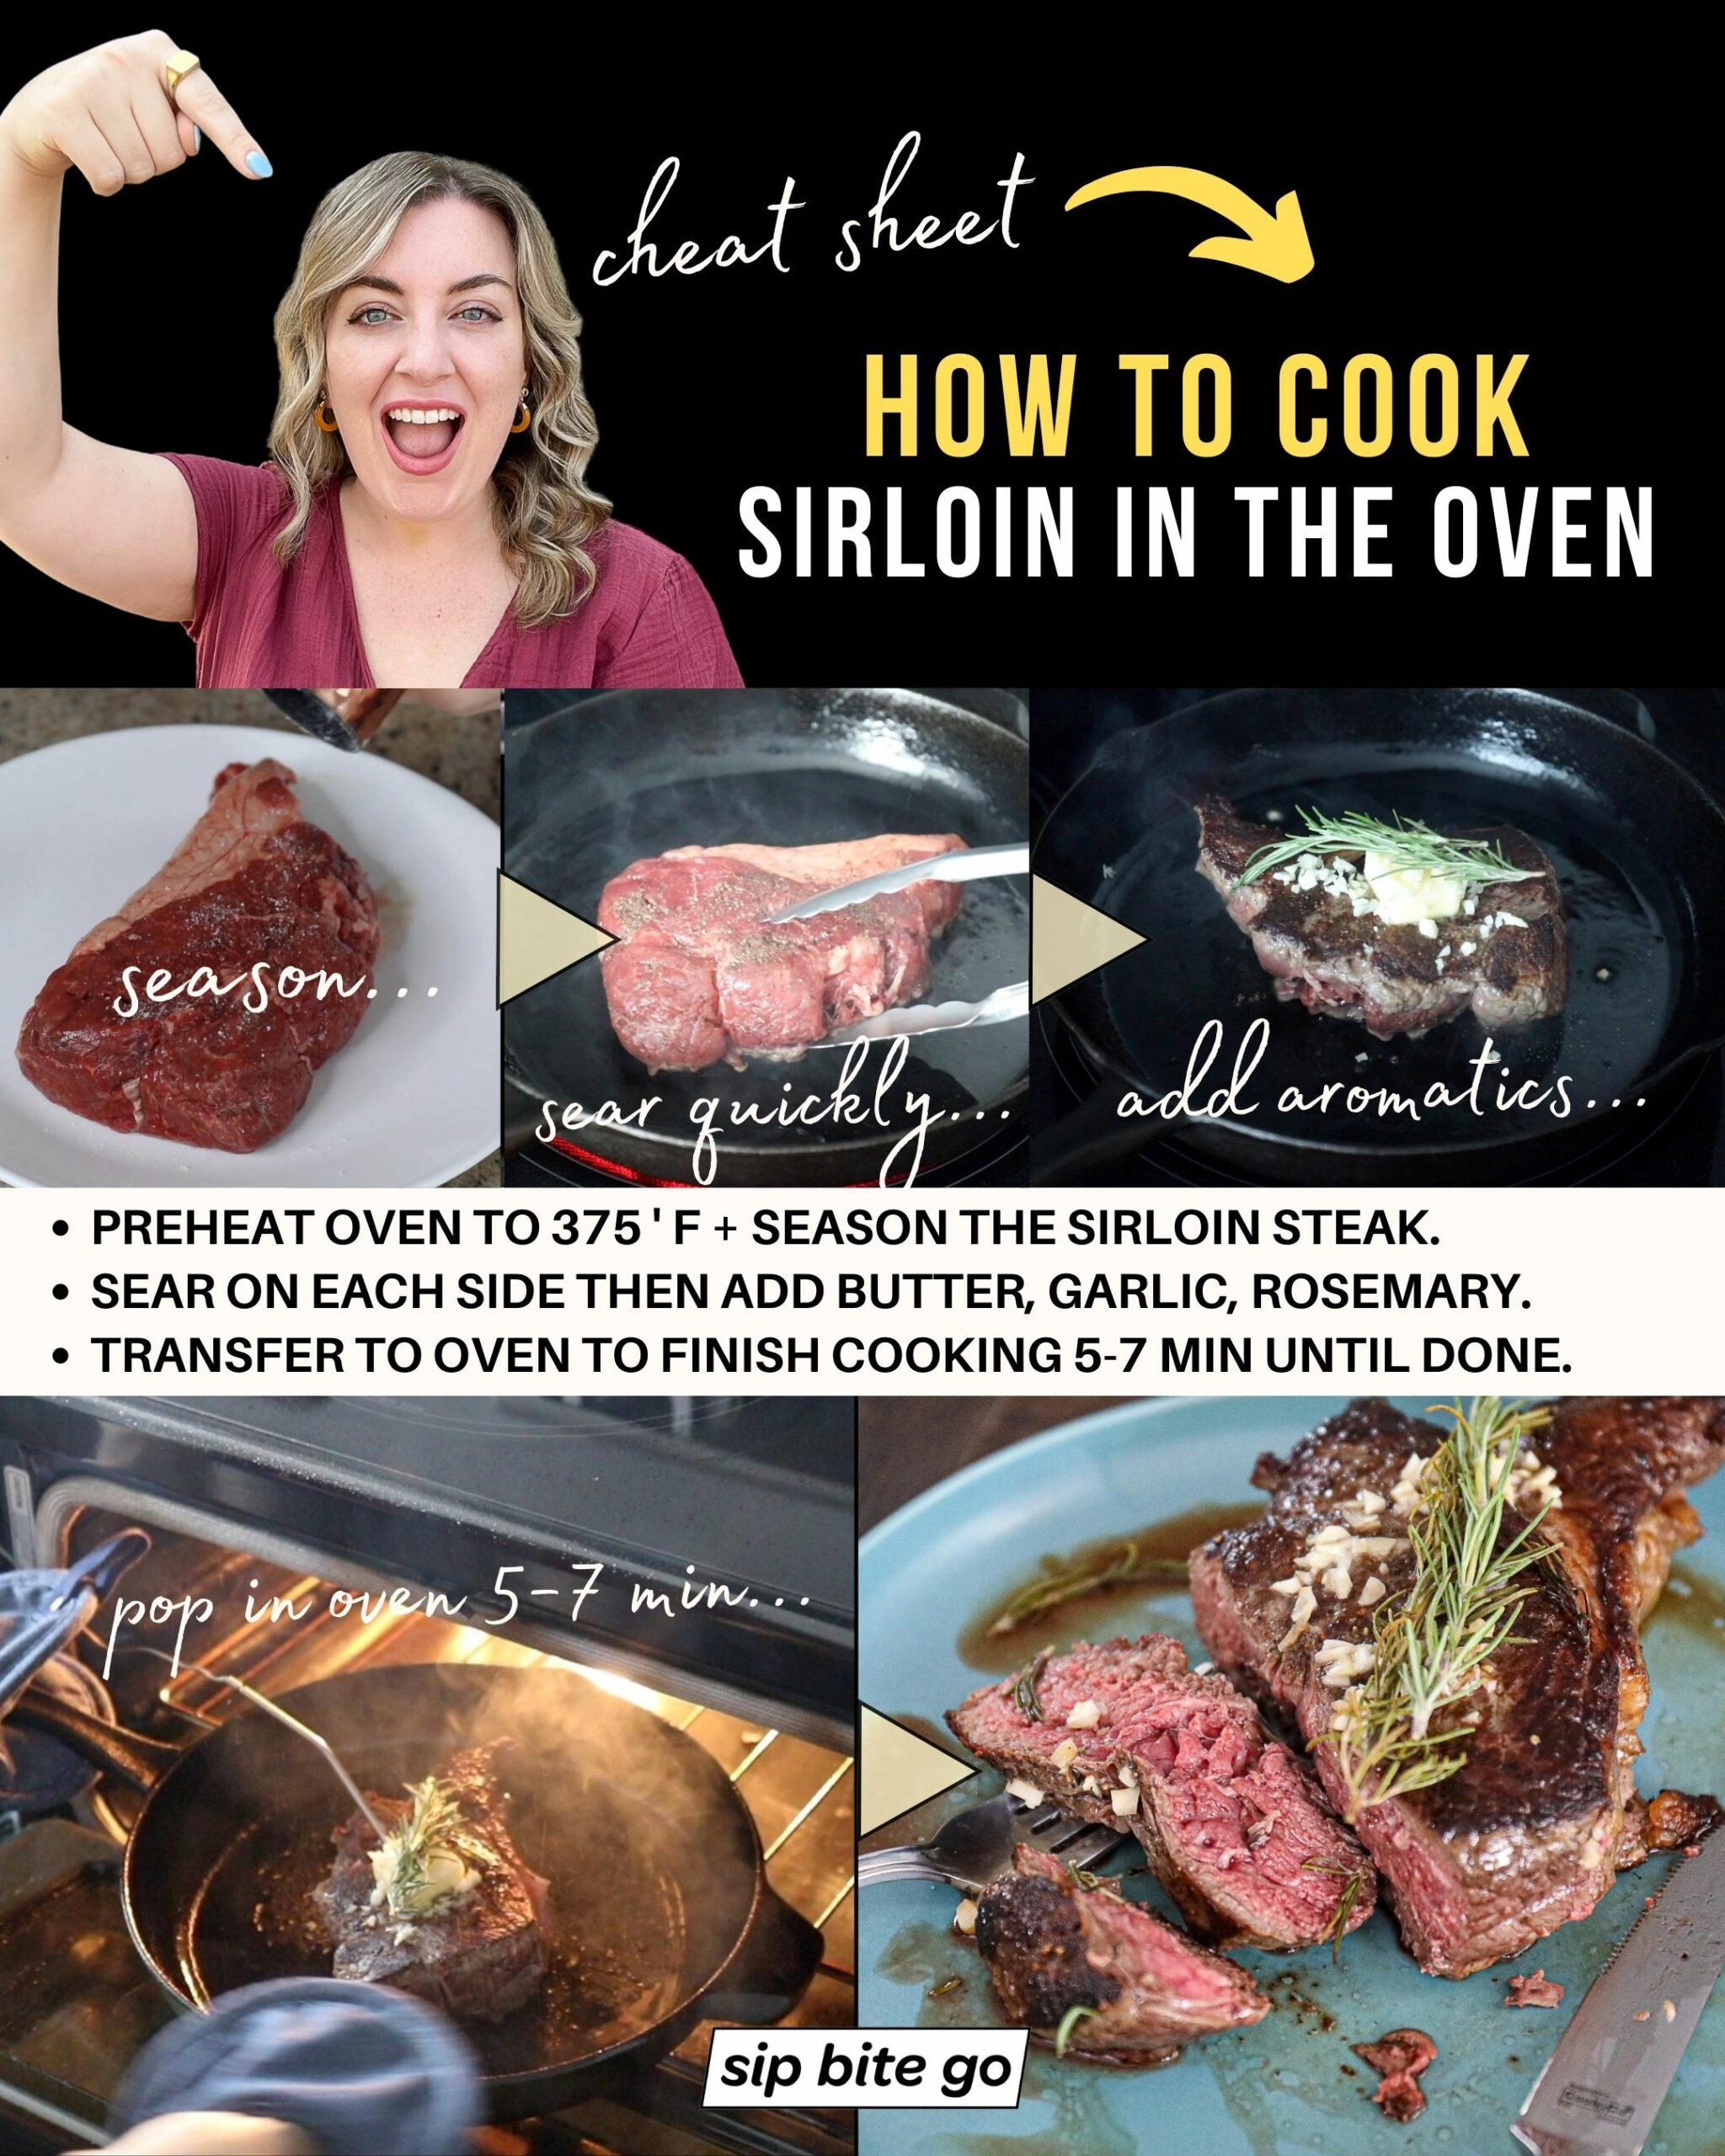 Infographic with recipe steps demonstrating how to cook sirloin steak in ovens with captions